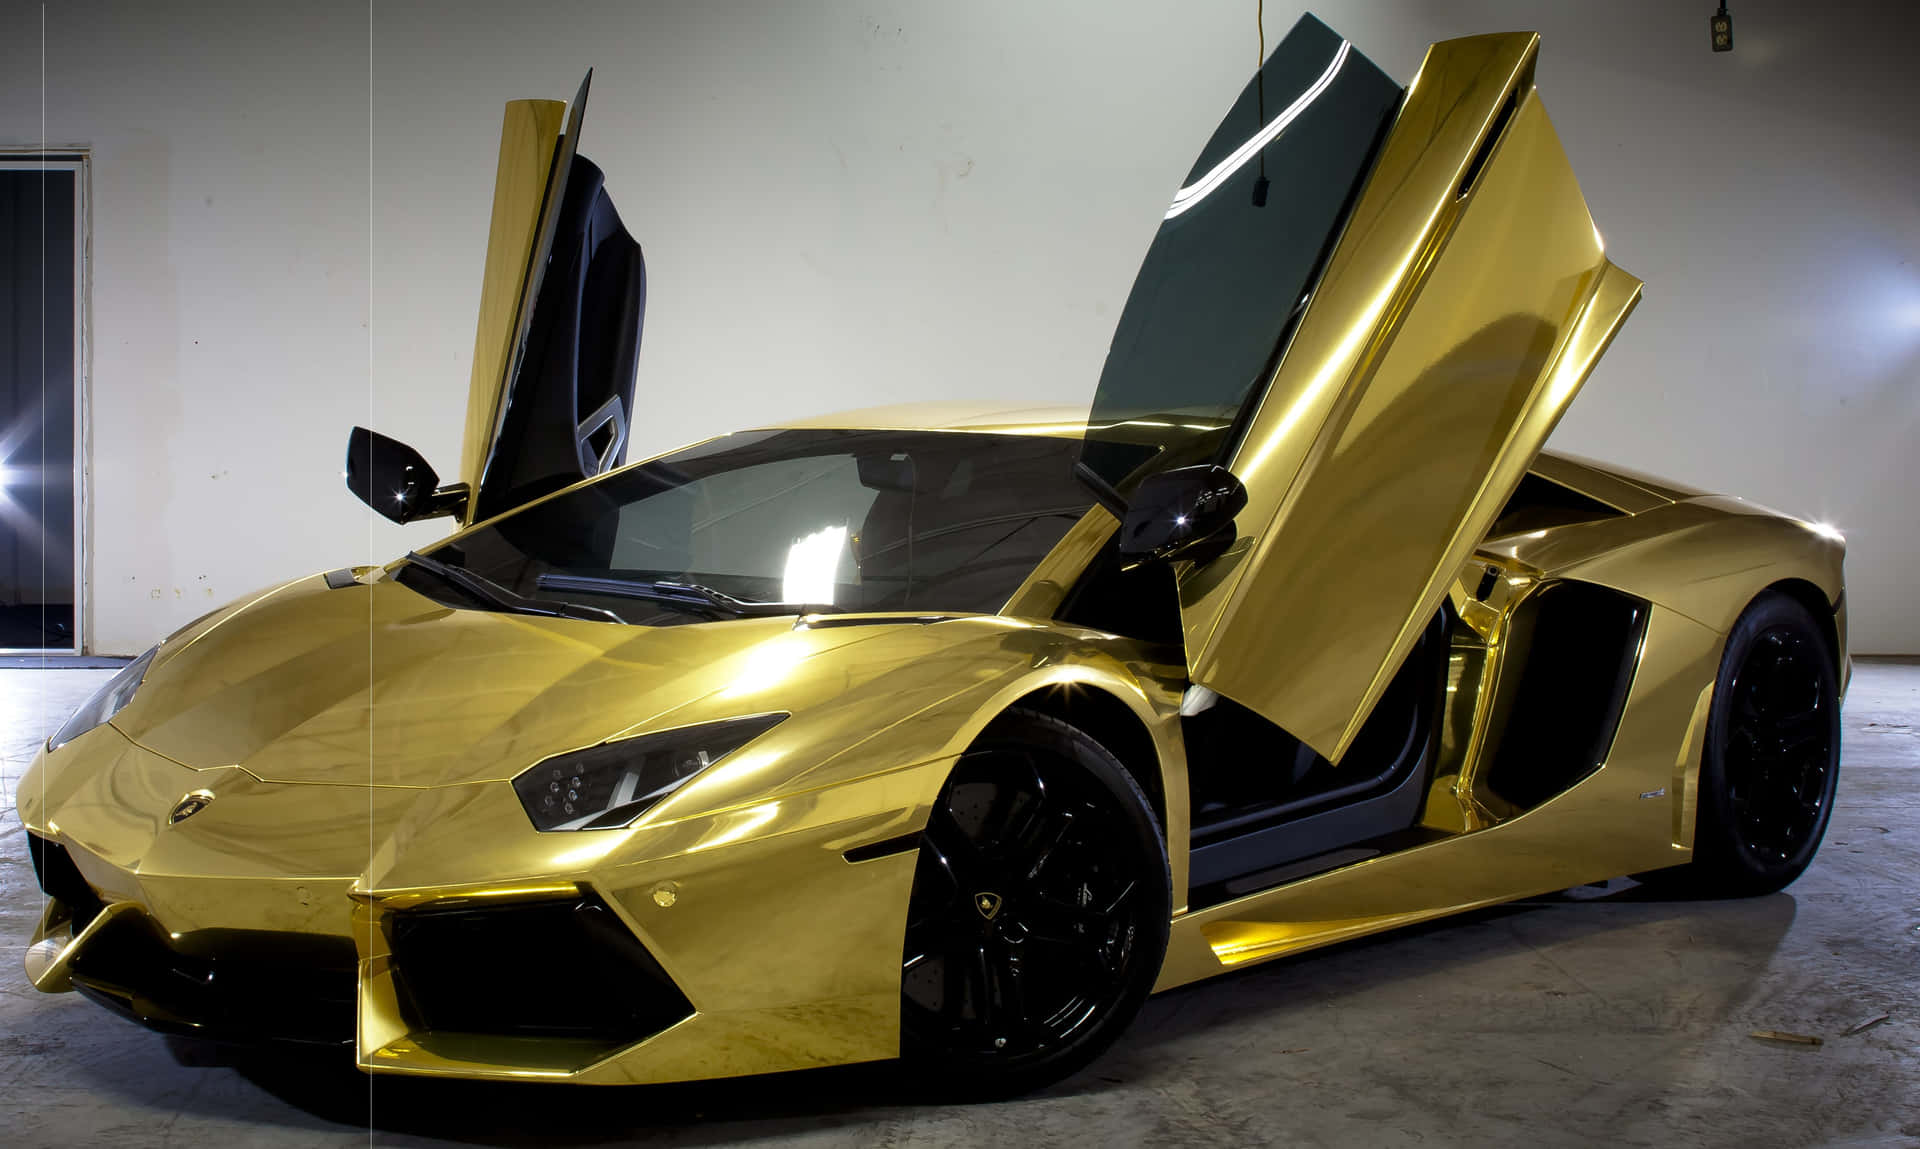 Plated Gold Lamborghini With Its Doors Open Wallpaper